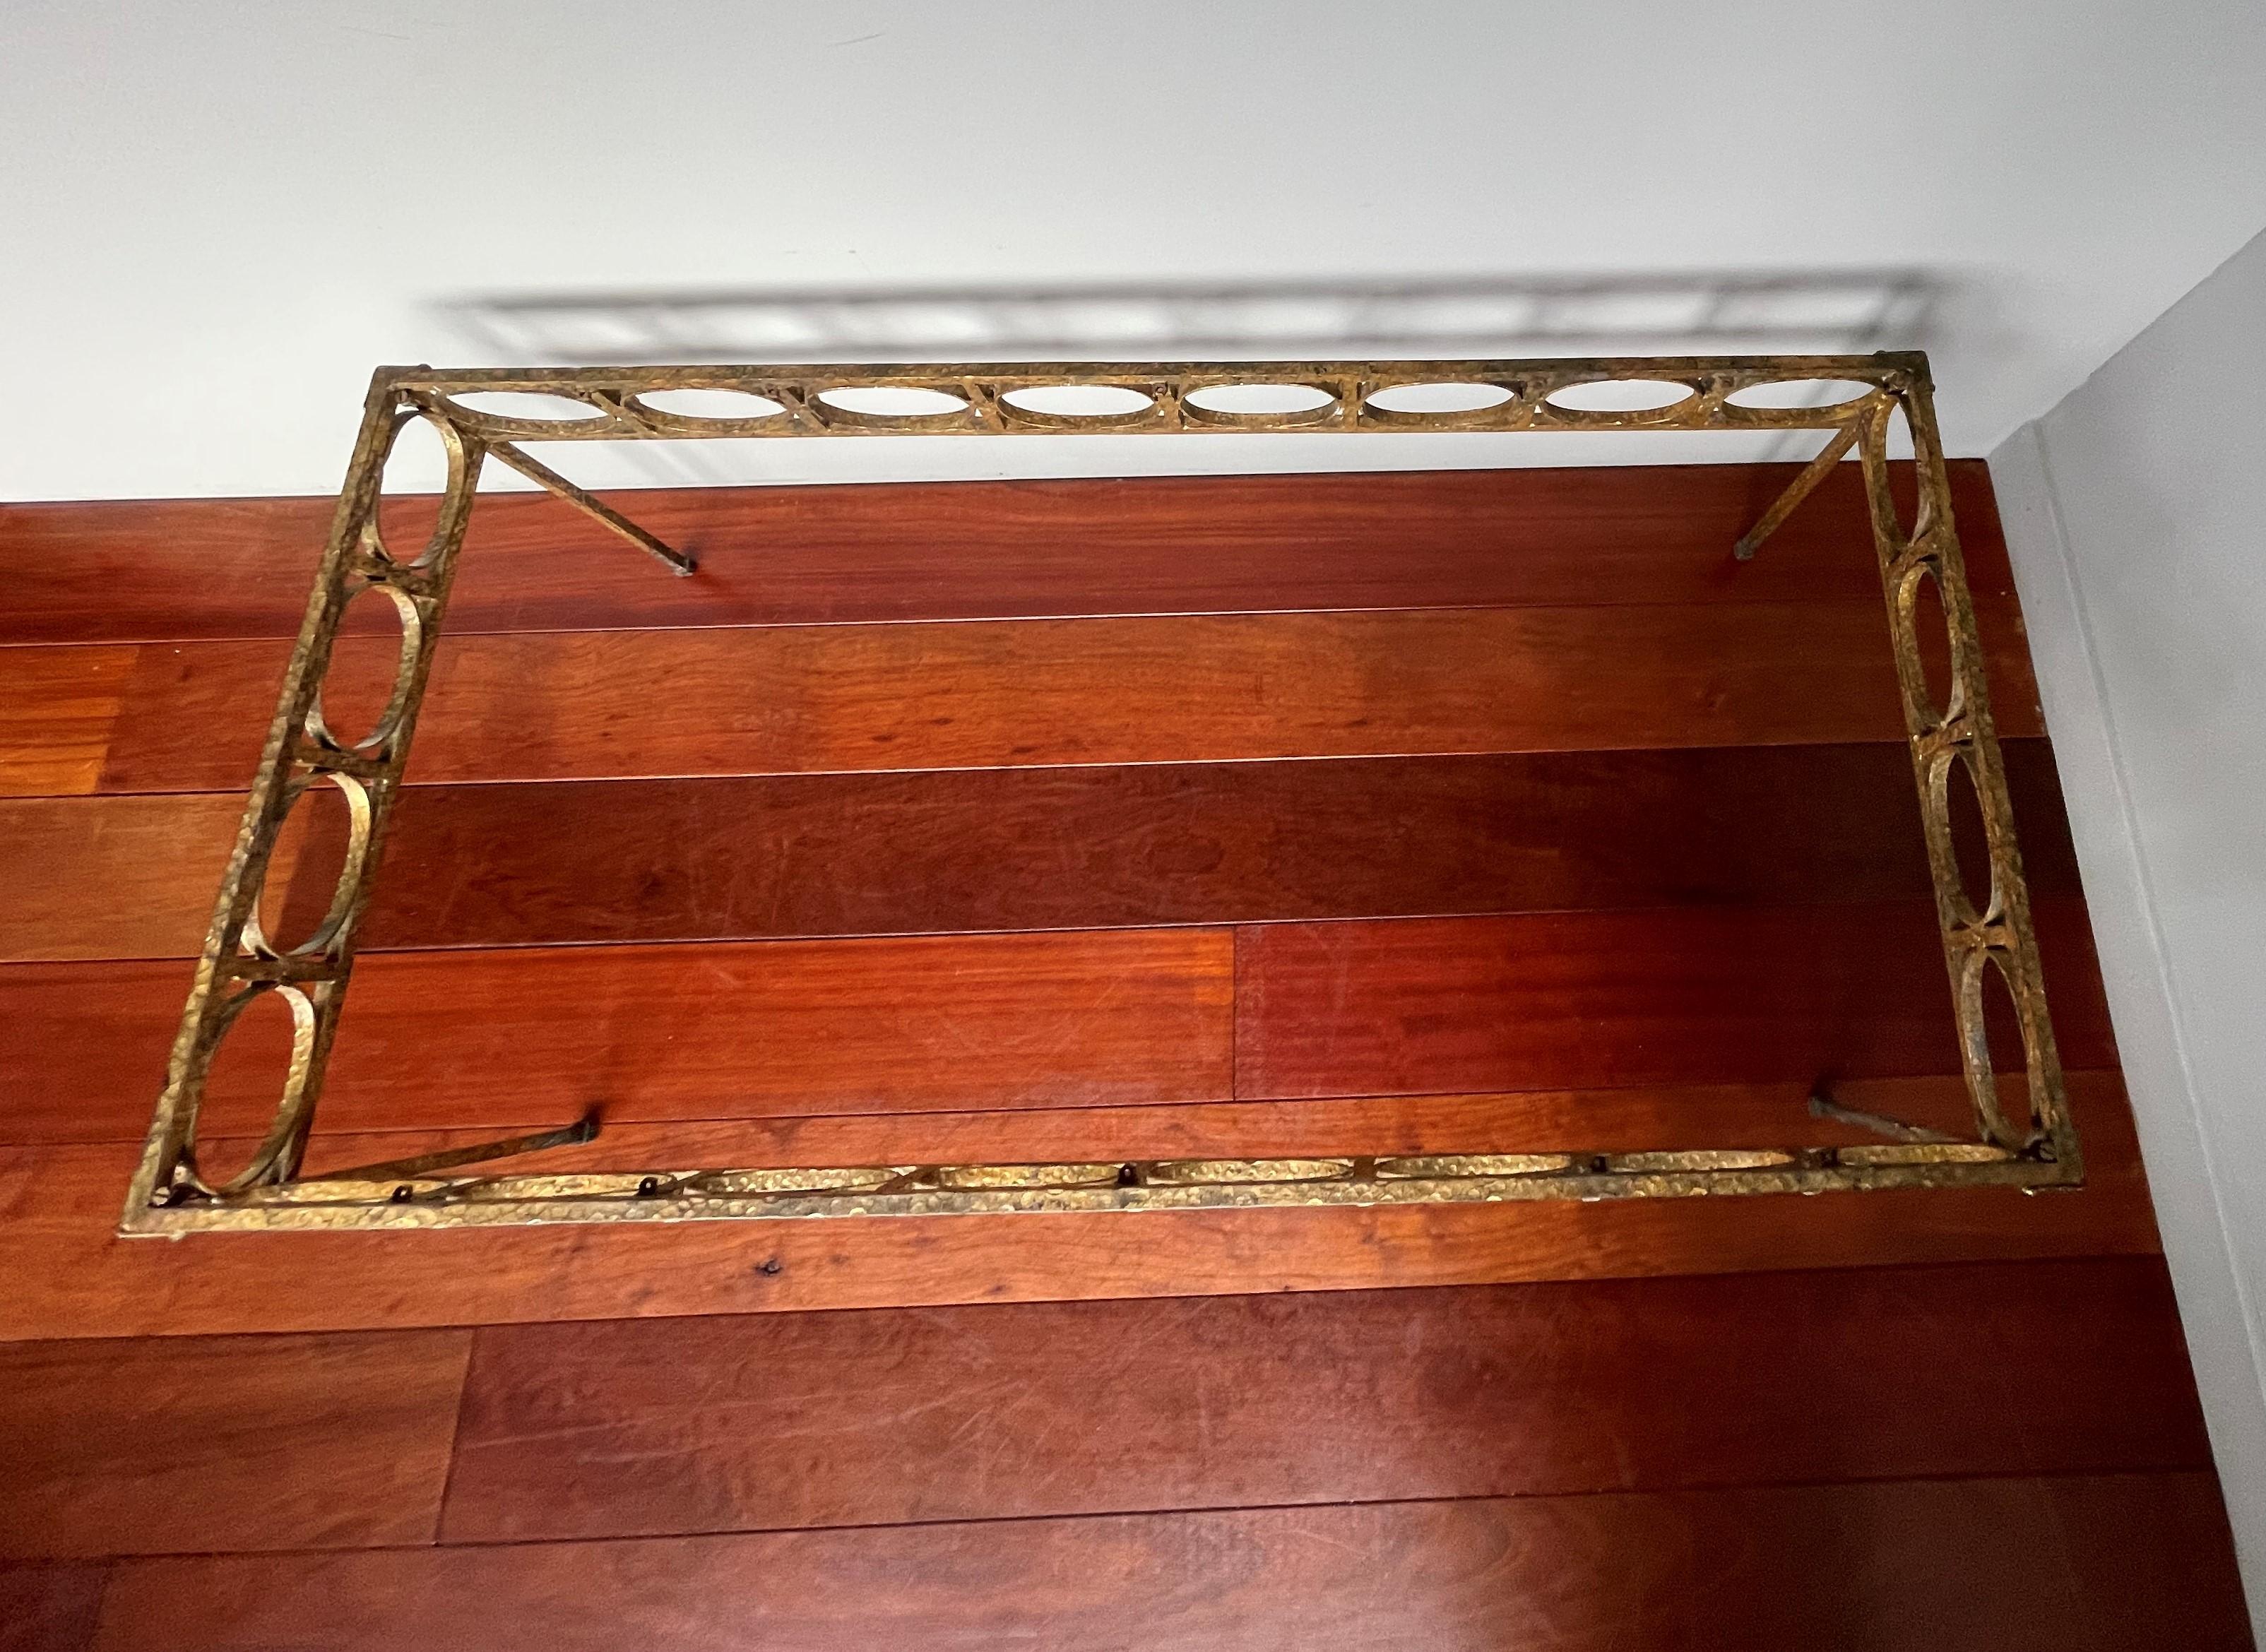 Stunning Midcentury Modern Gilt Wrought Iron Coffee Table Base by Ferro Art 1950 For Sale 4